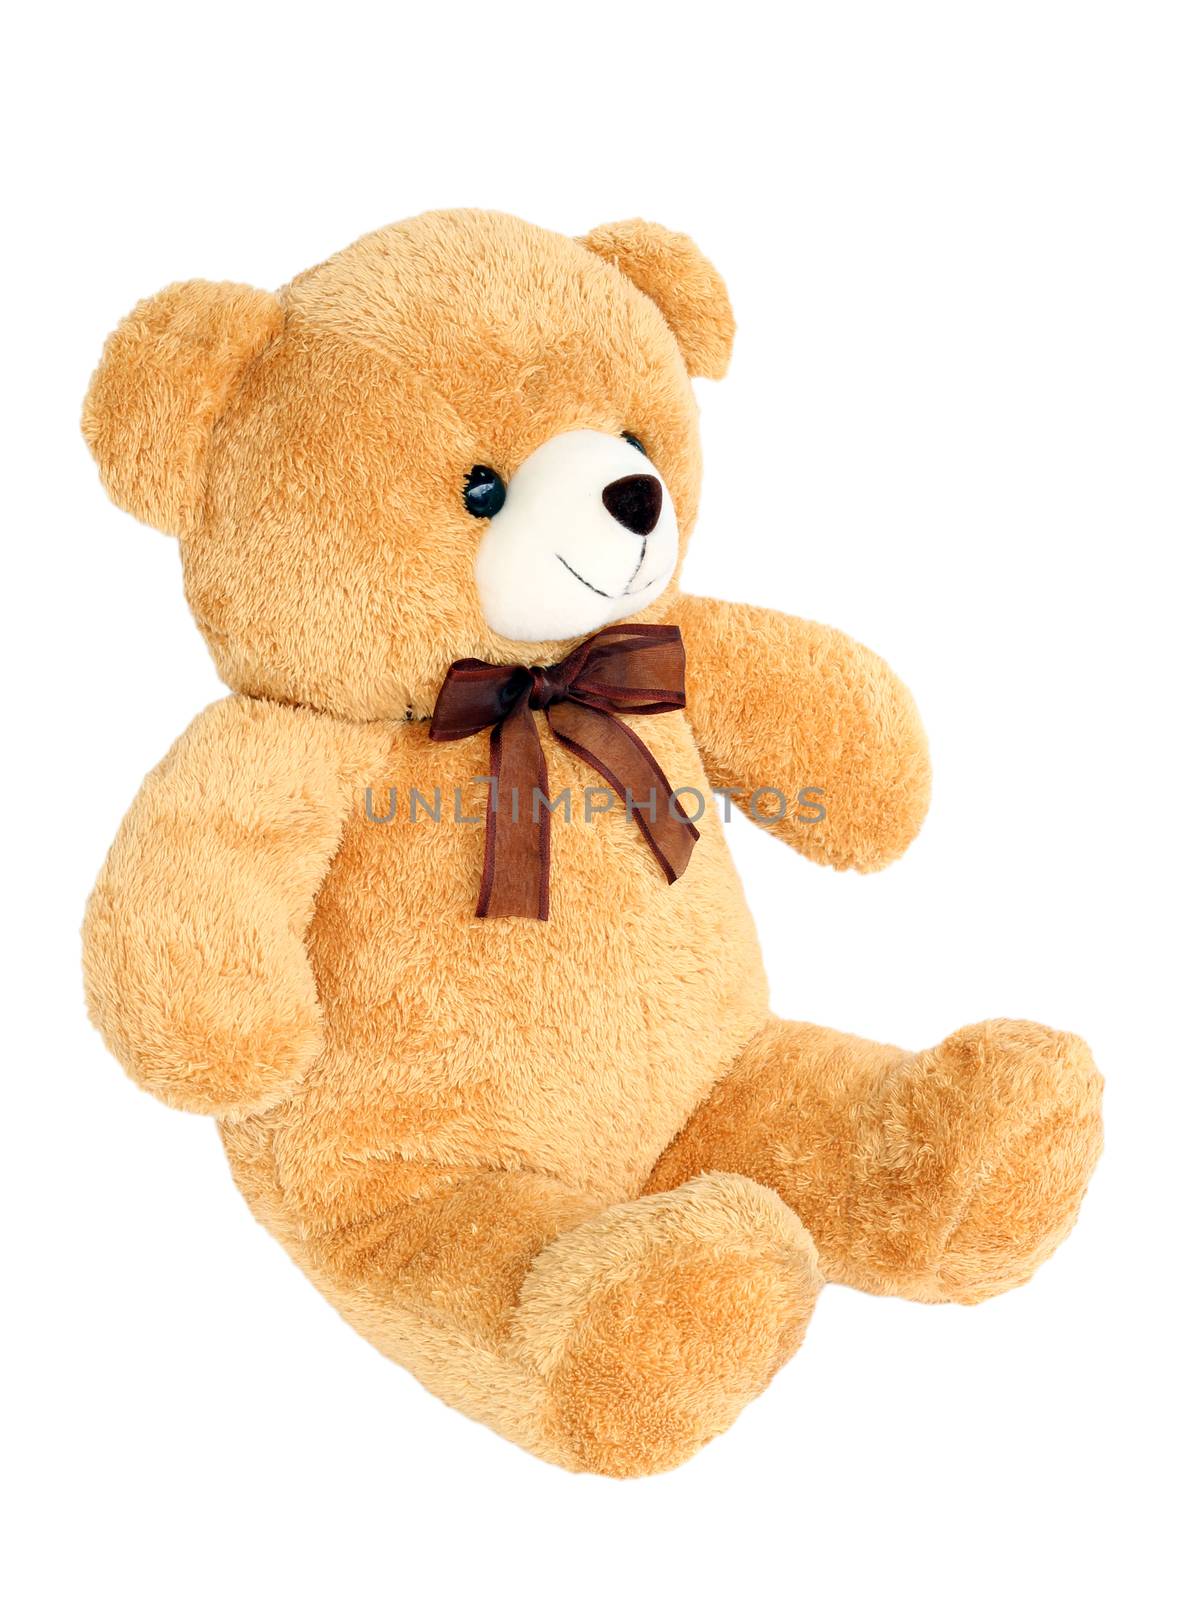 Image of toy teddy bear on white background